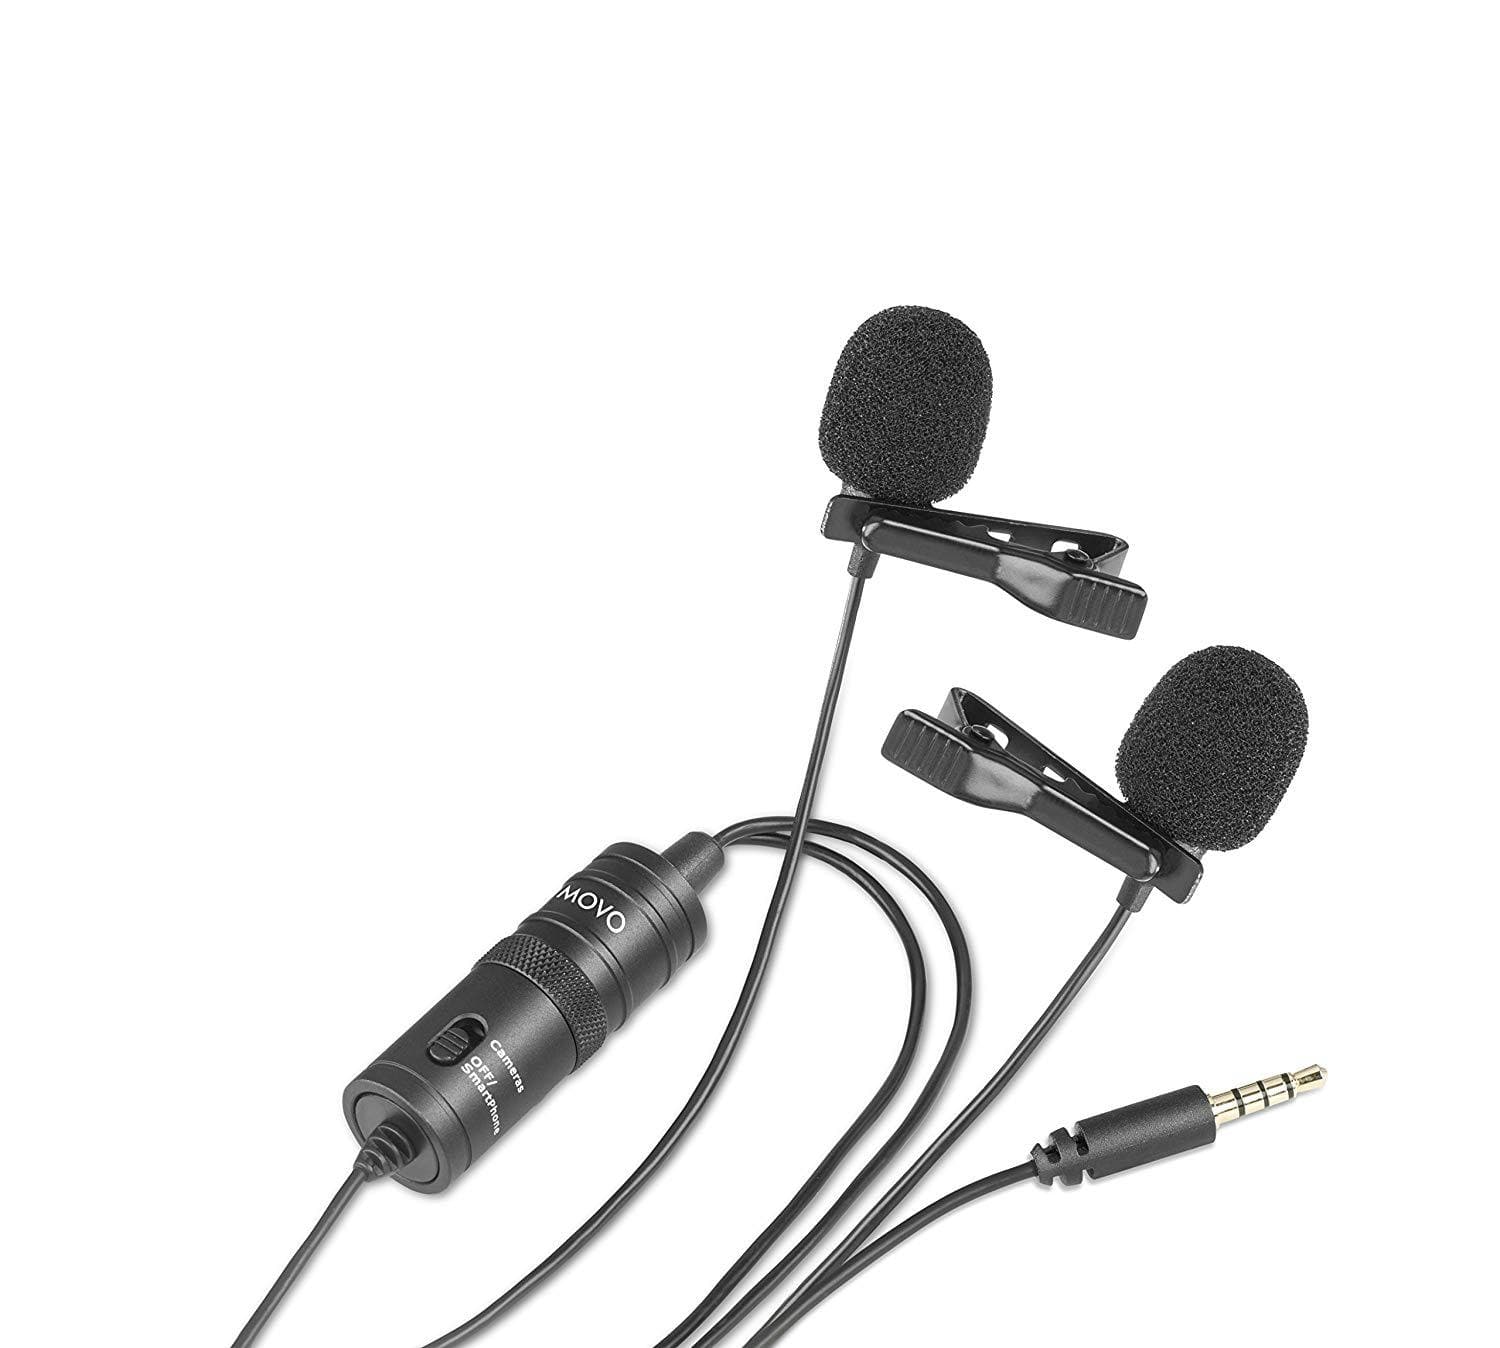 Double-Lav Omnidirectional Interview Mic - Movo